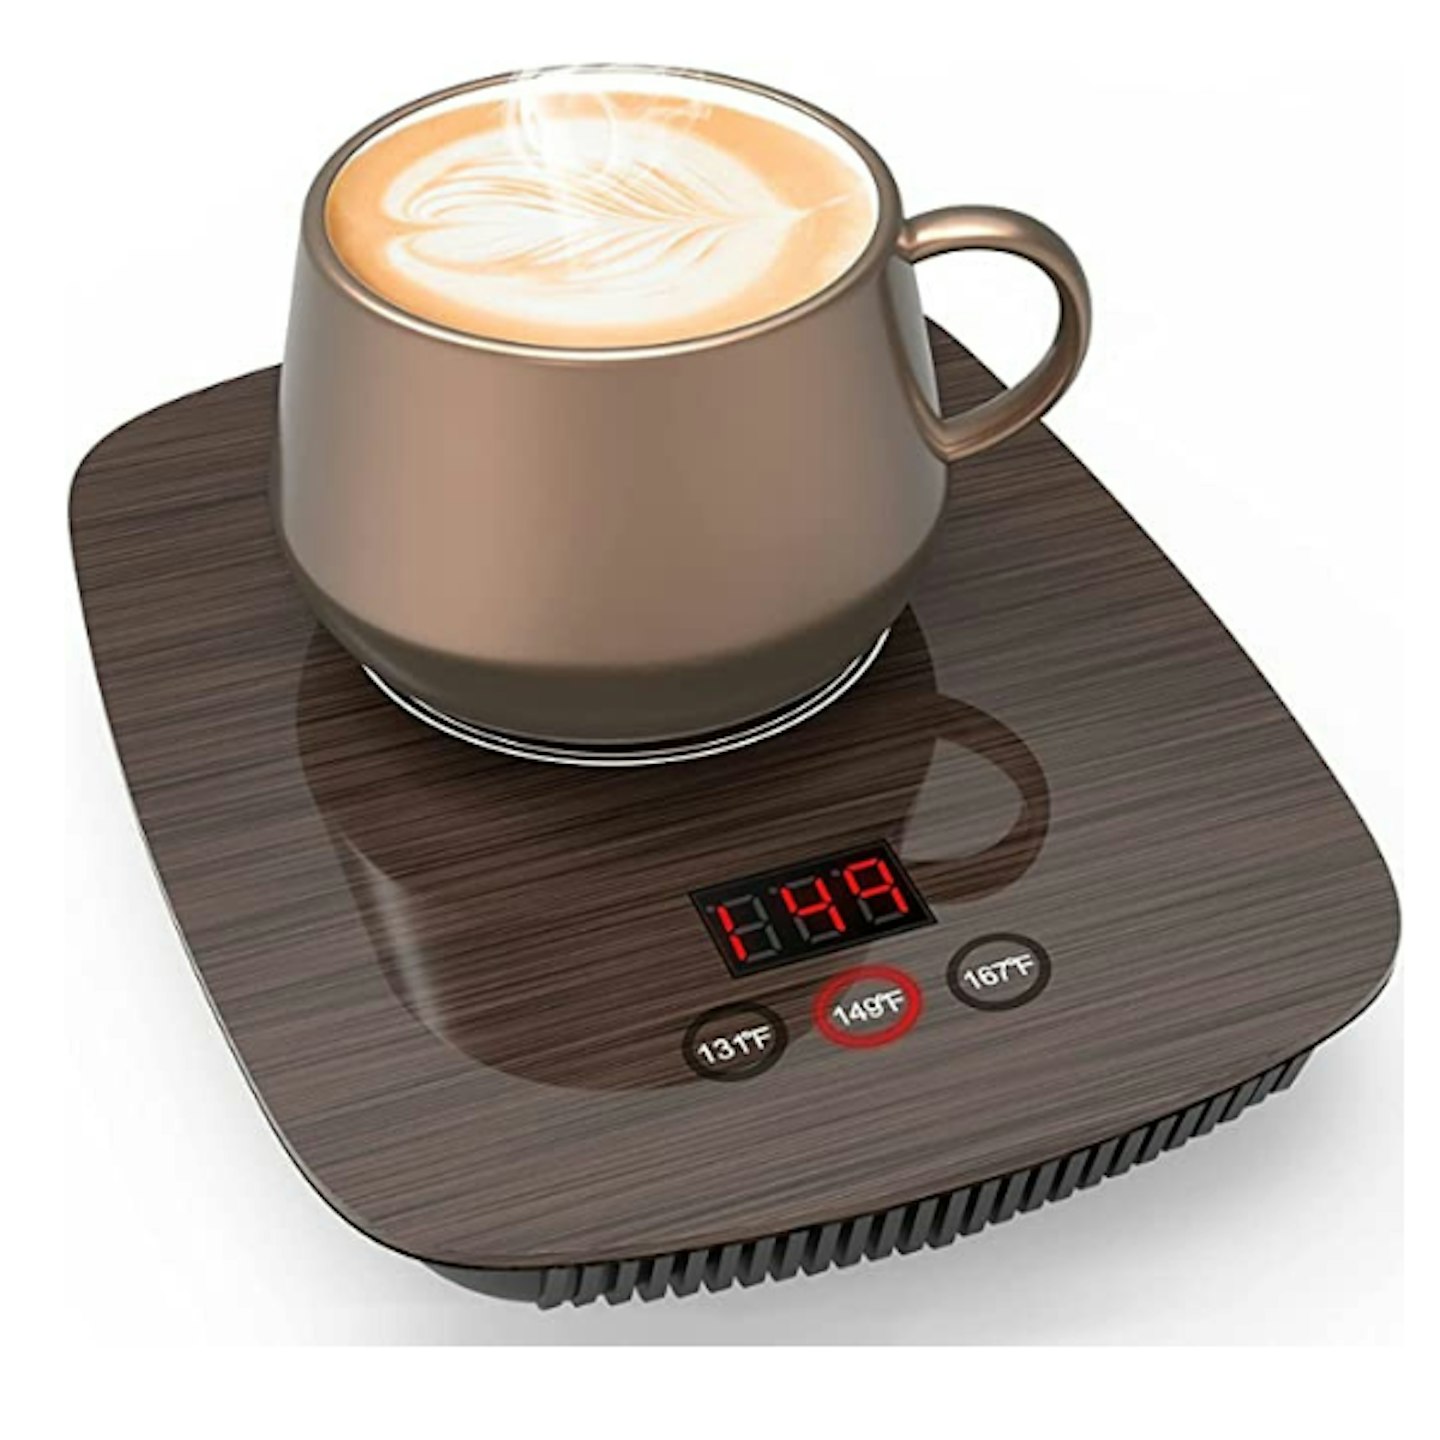 Coffee Mug Warmer with (Ceramic) Cup (USB Cable) & Cup Warmer Set for Desk  with Gravity Sensing Auto Shut Off Heating Plate for Home Office Milk Tea